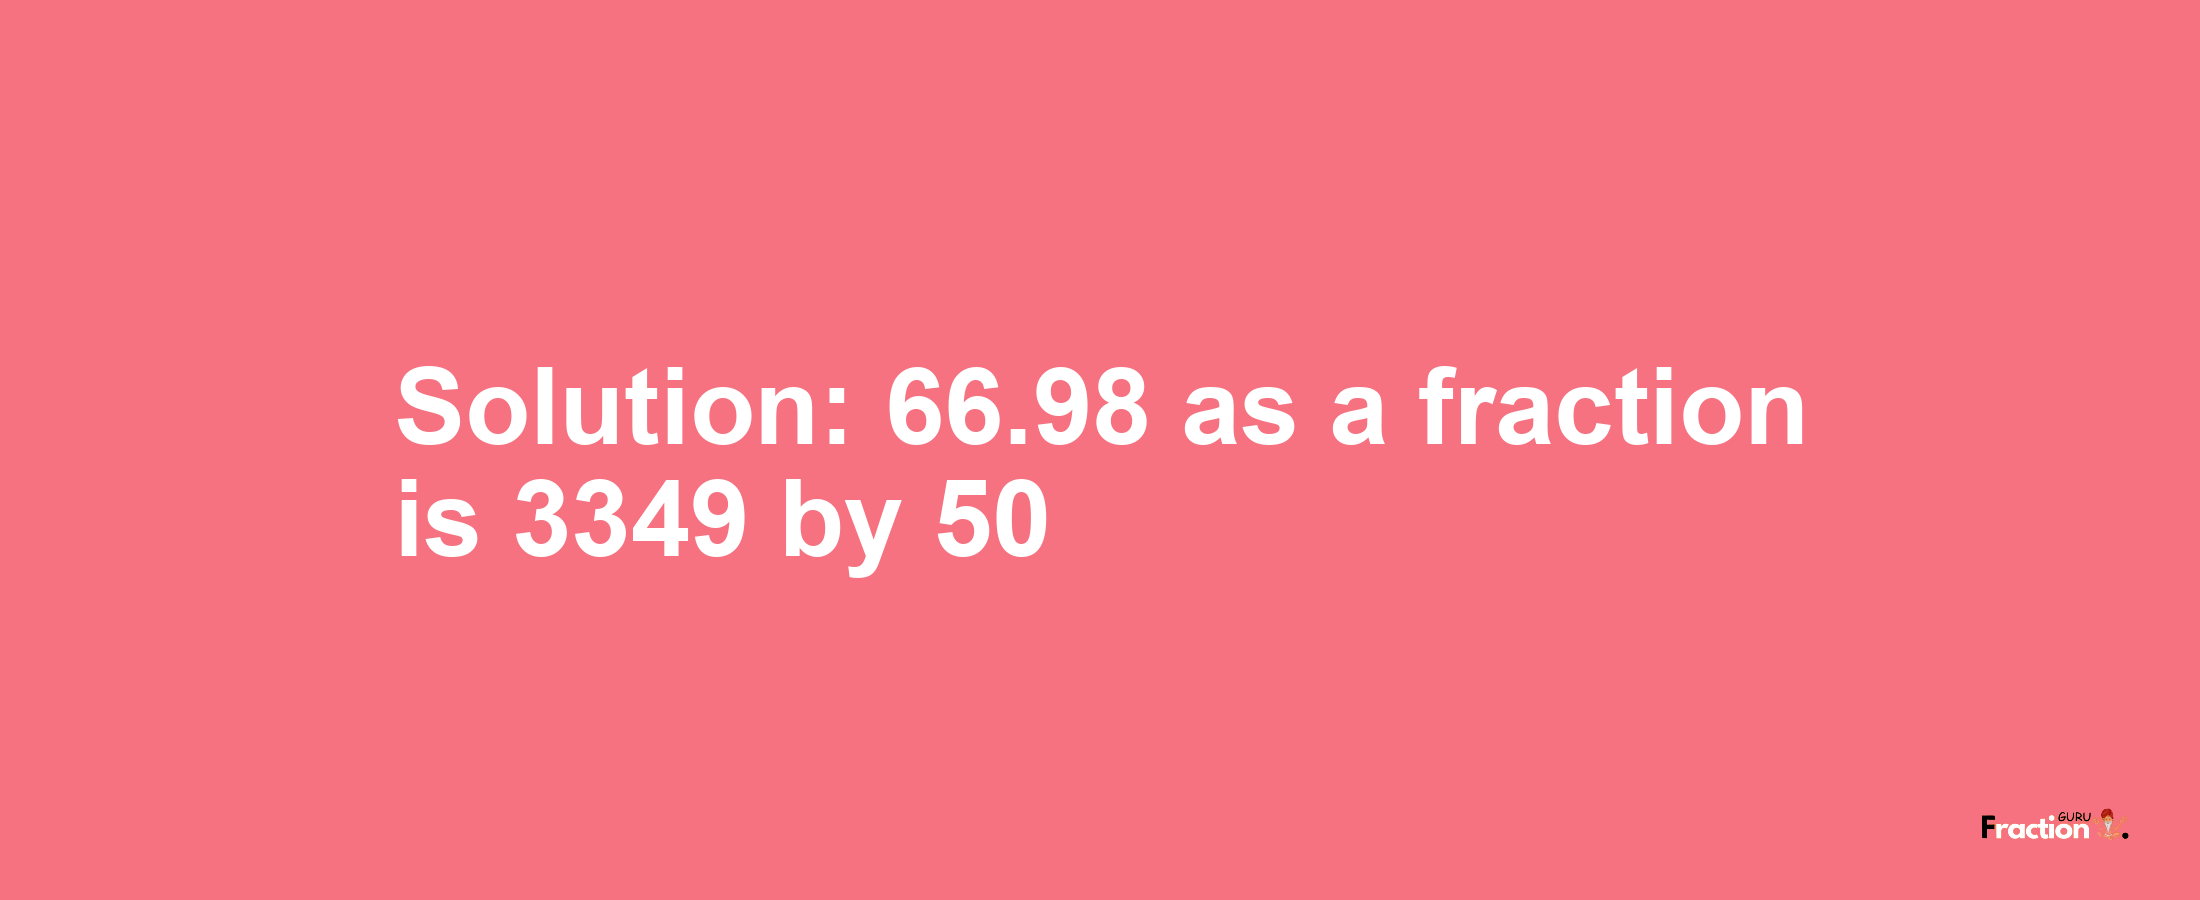 Solution:66.98 as a fraction is 3349/50